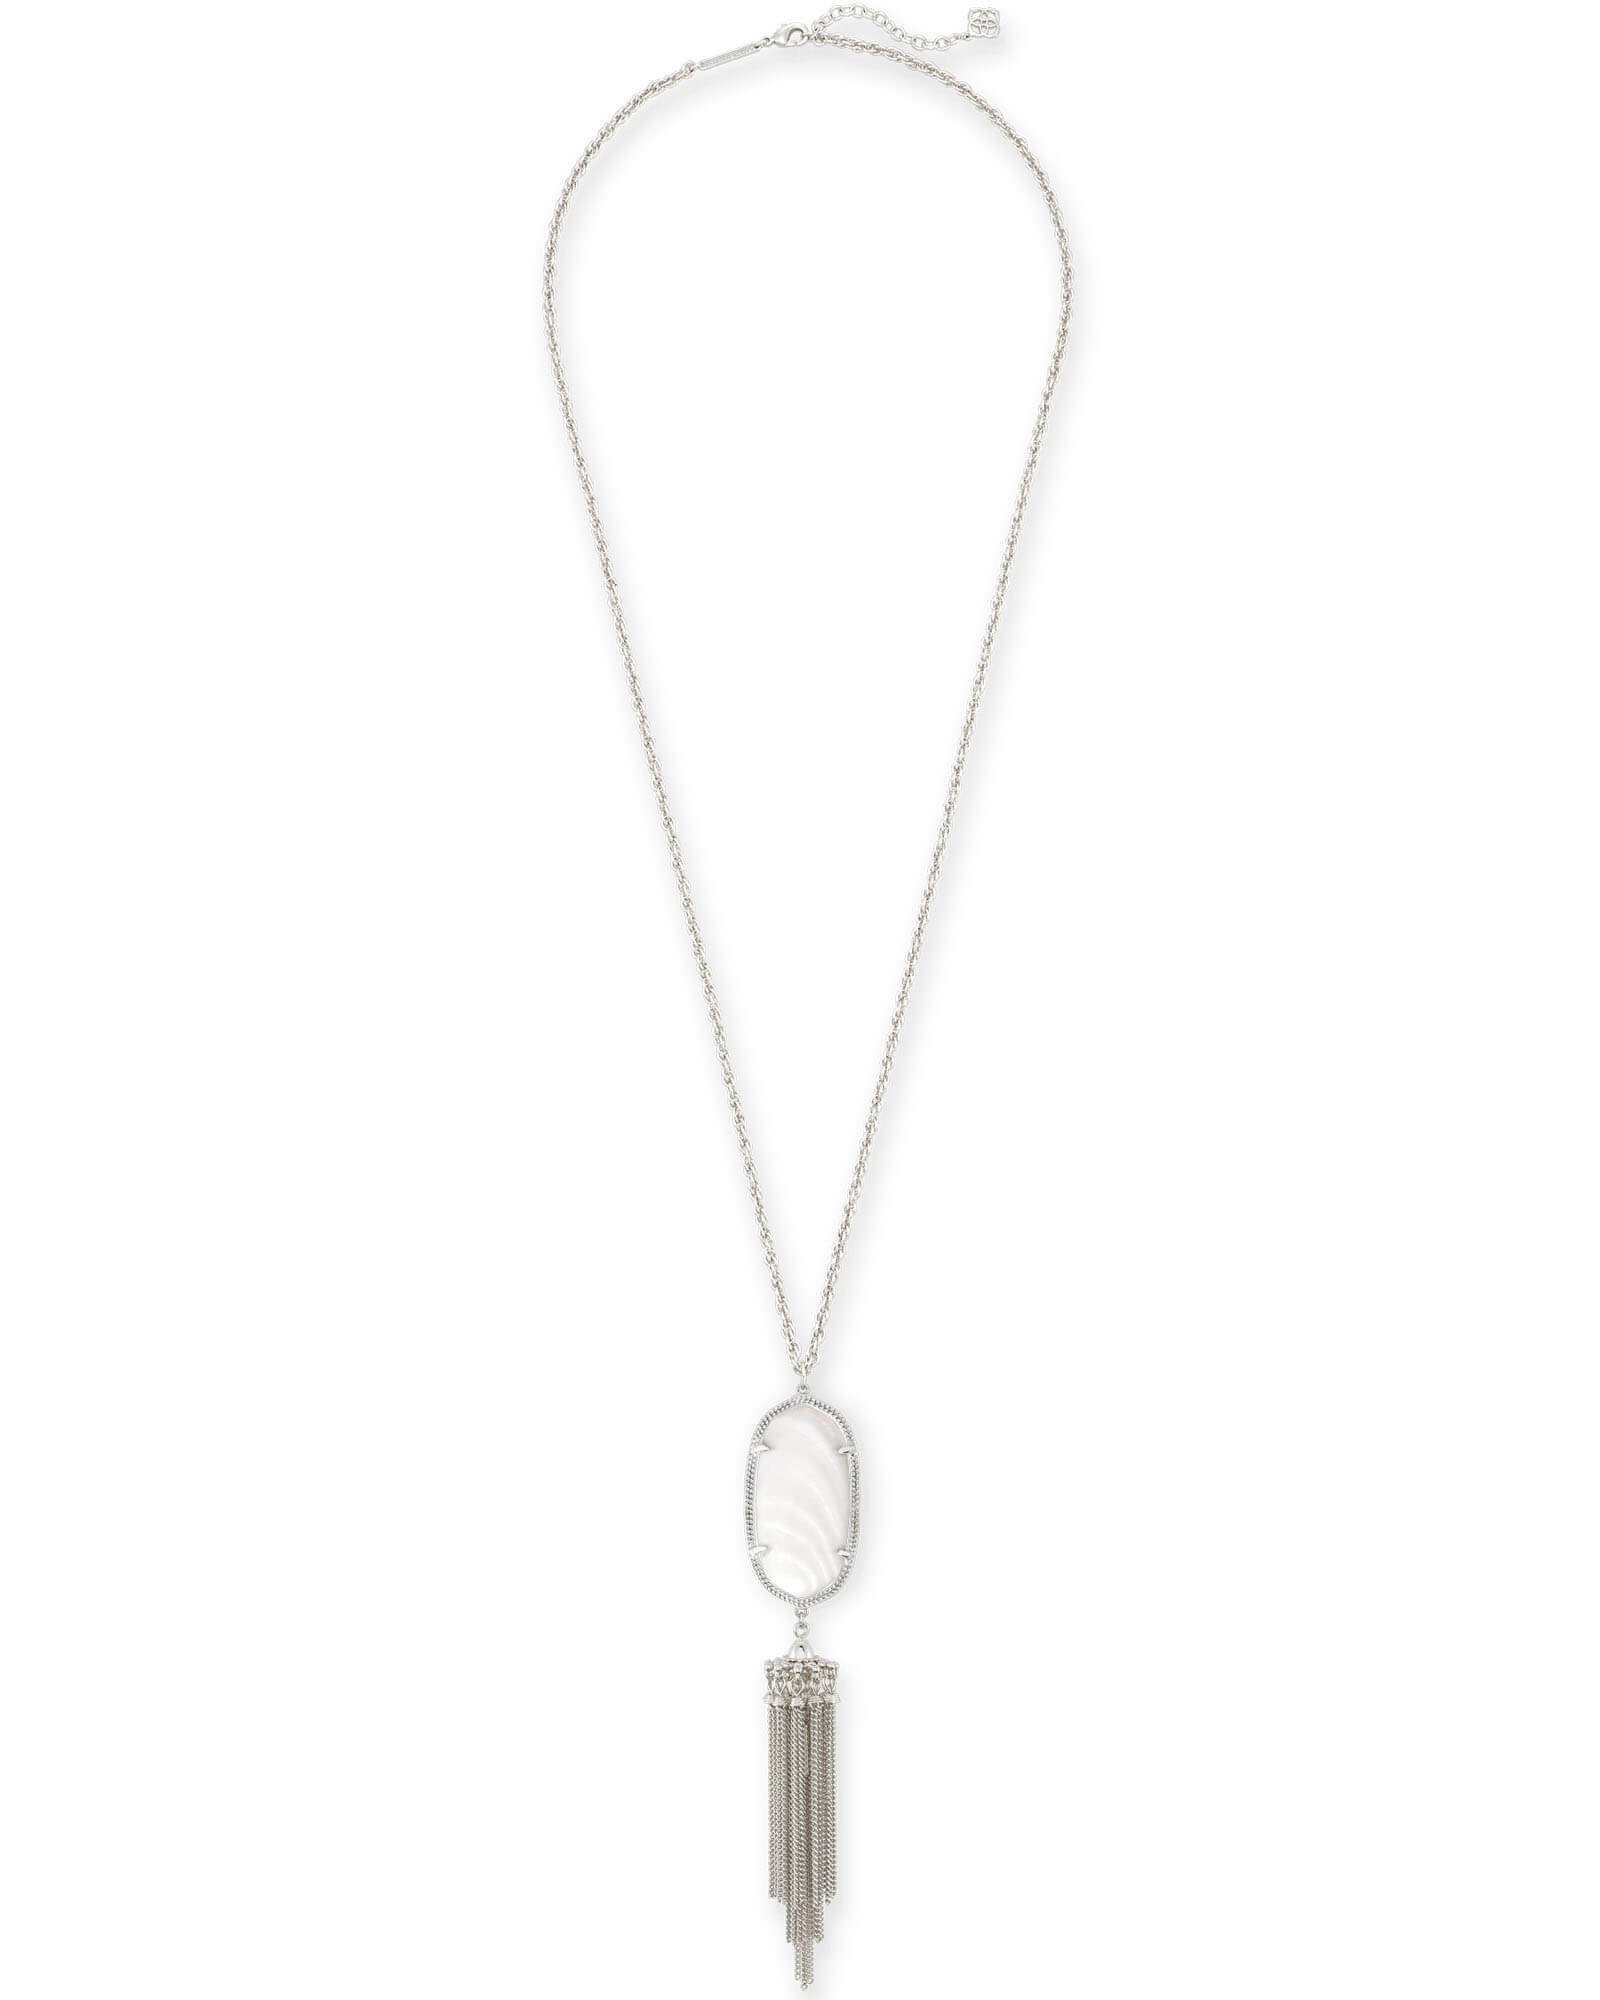 Rayne Silver Long Necklace in Mother of Pearl | Kendra Scott